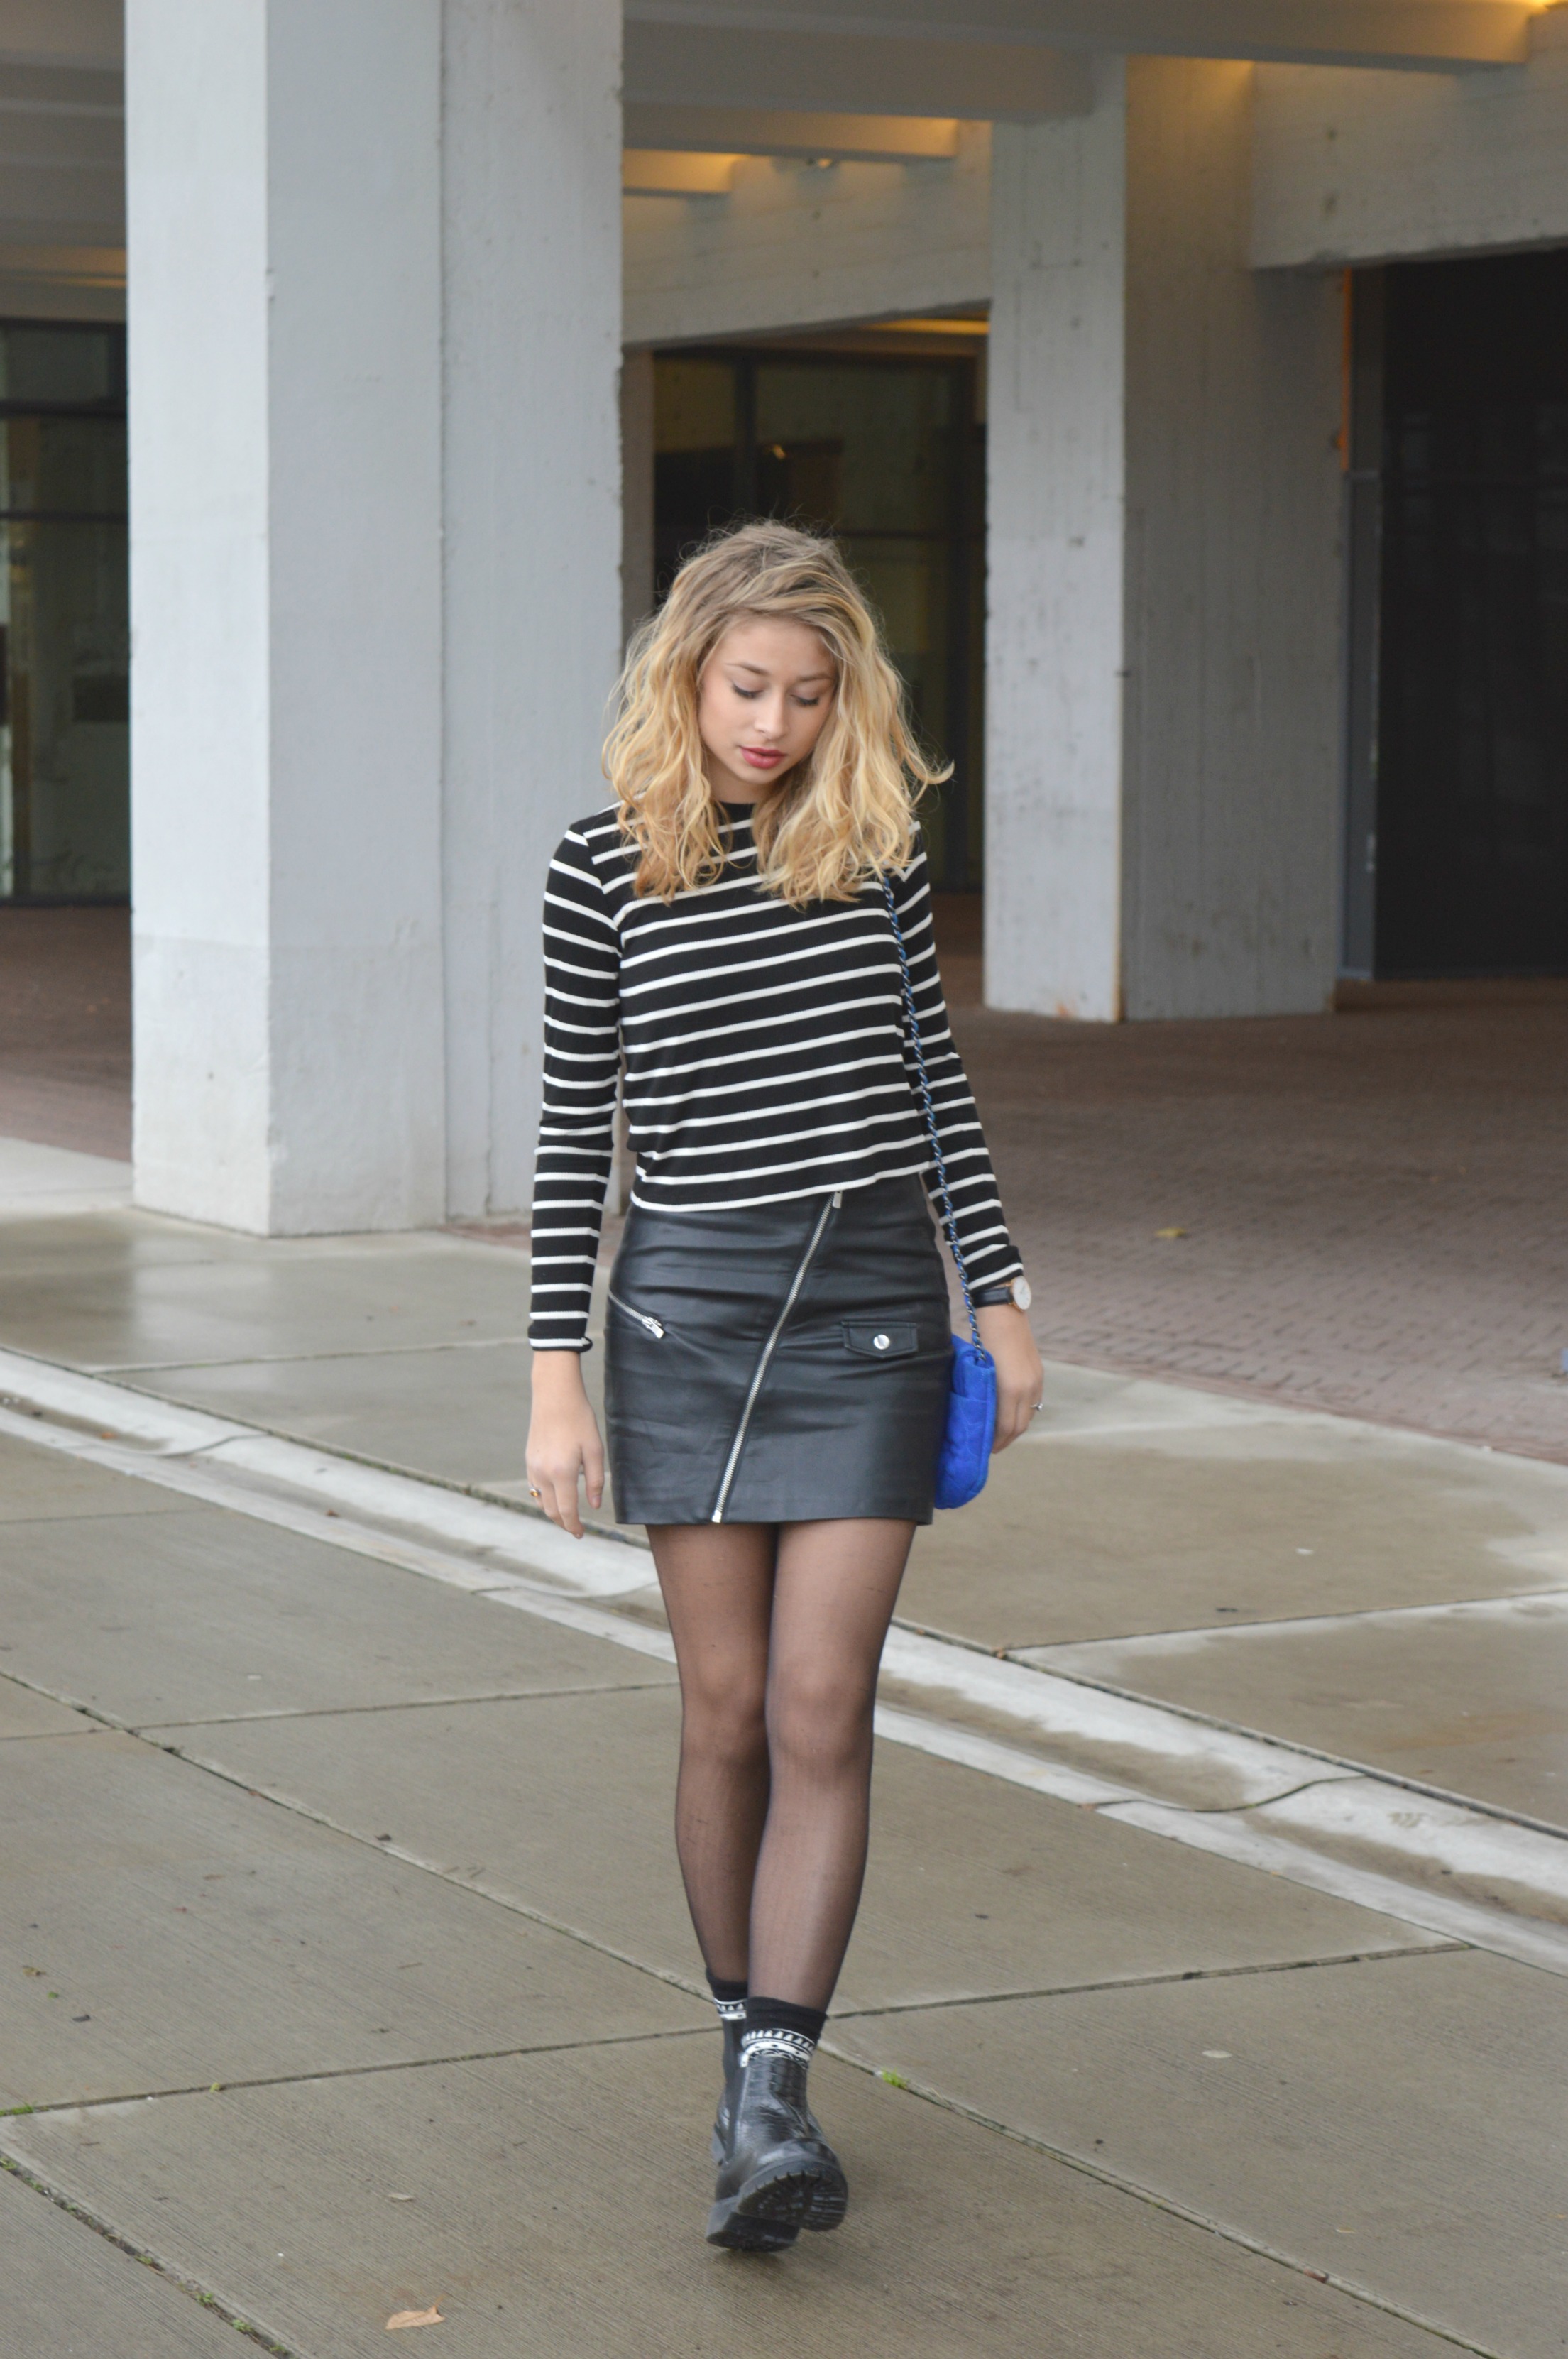 Tragisch Overleven Vaarwel Outfit of the day | stripes and leather – B Y I S A B E A U